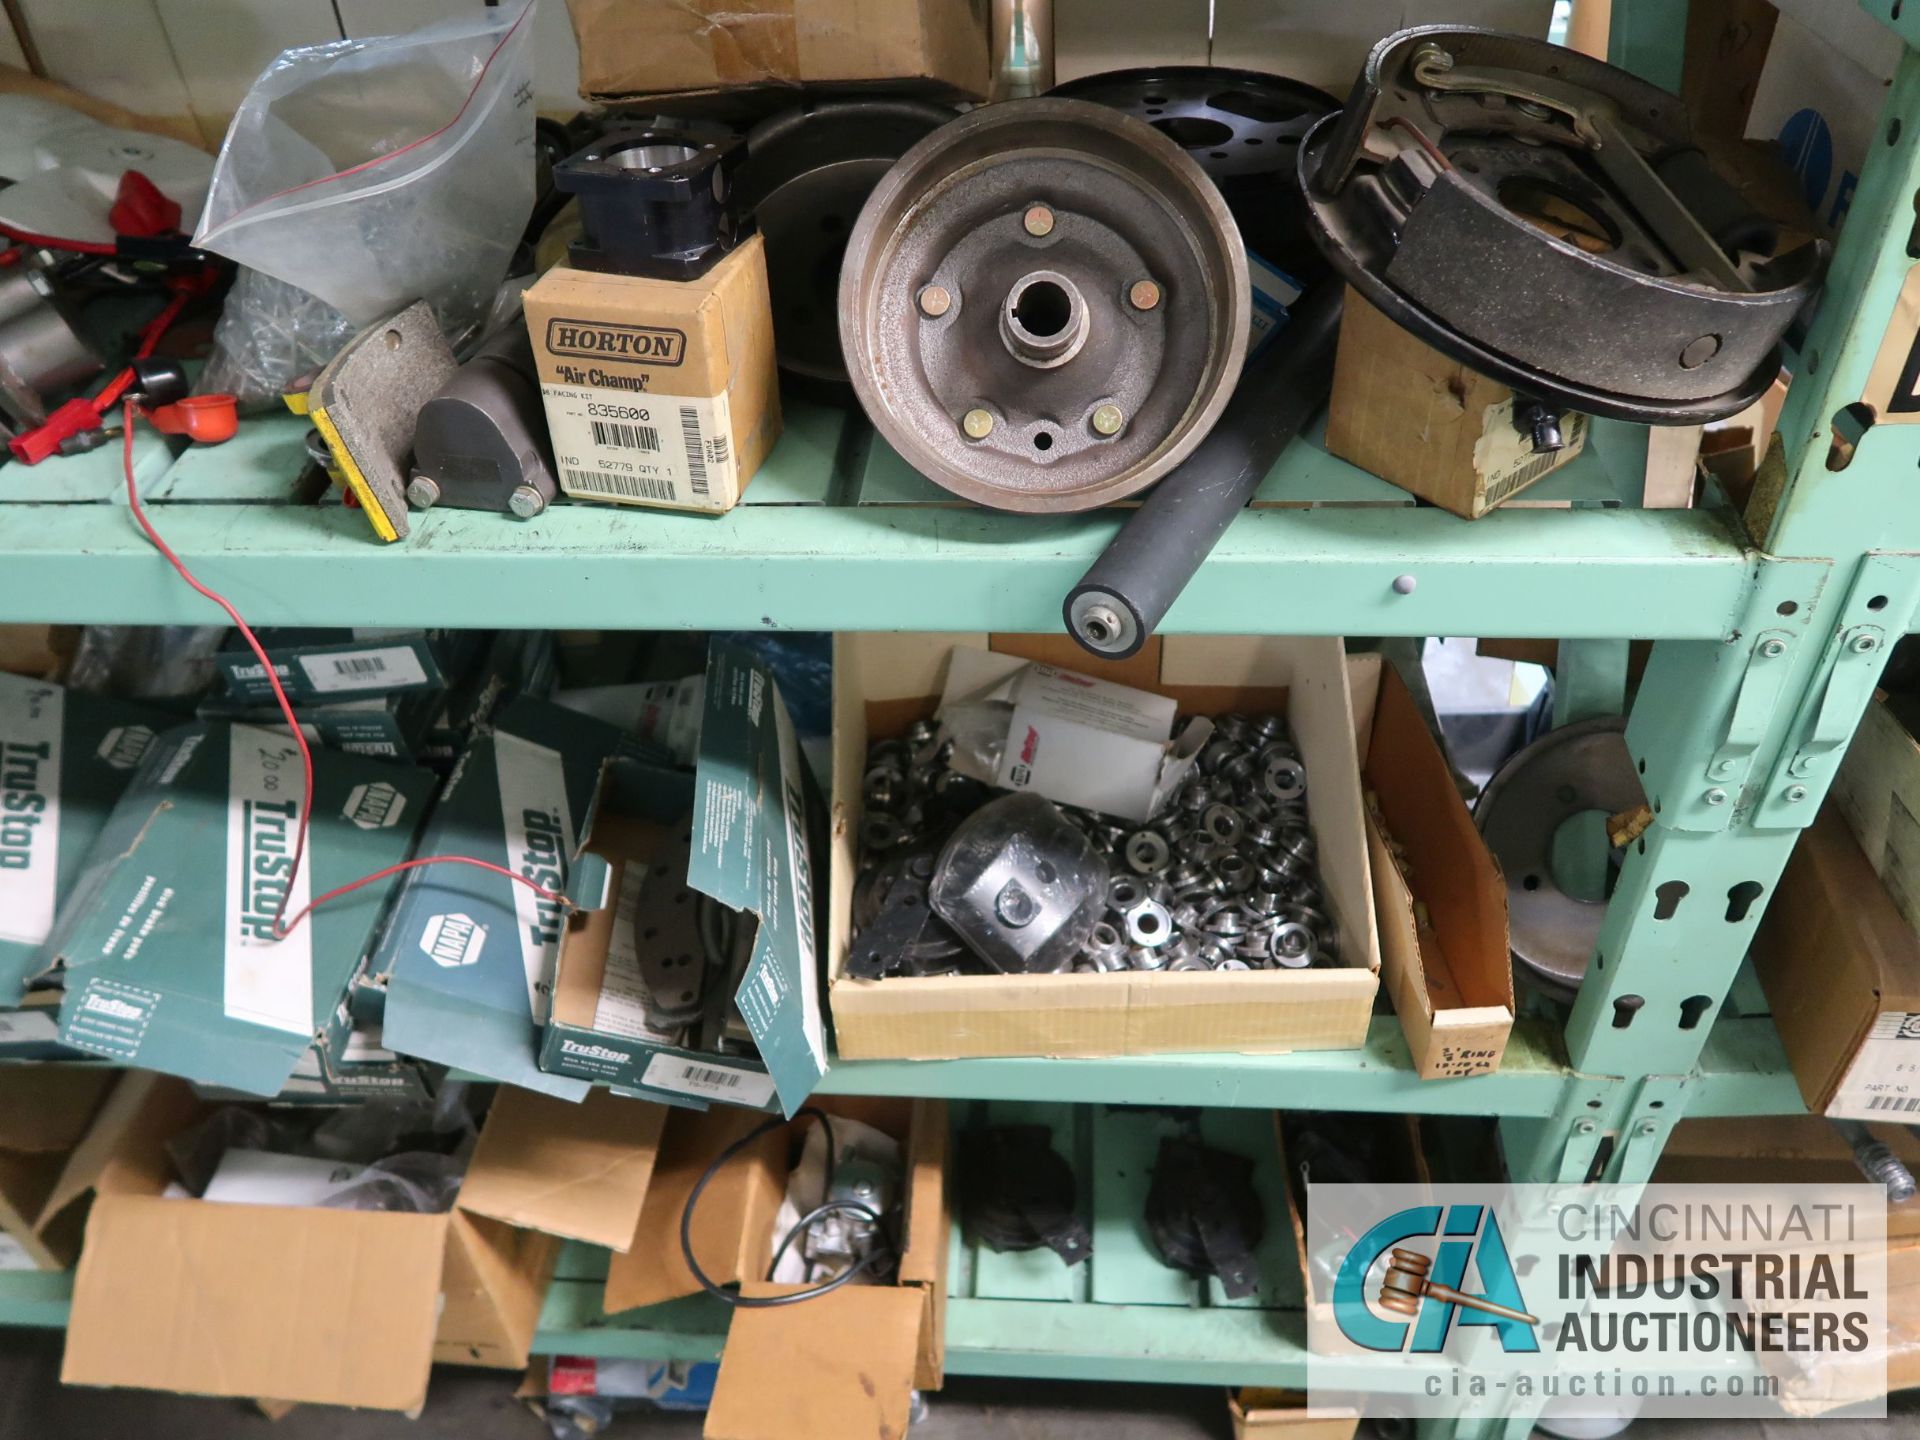 CONTENTS OF (6) RACKS INCLUDING MISCELLANEOUS AUTOMOTIVE PARTS, BREAKS, ROTORS, GASKETS, MOUNTING - Image 35 of 38